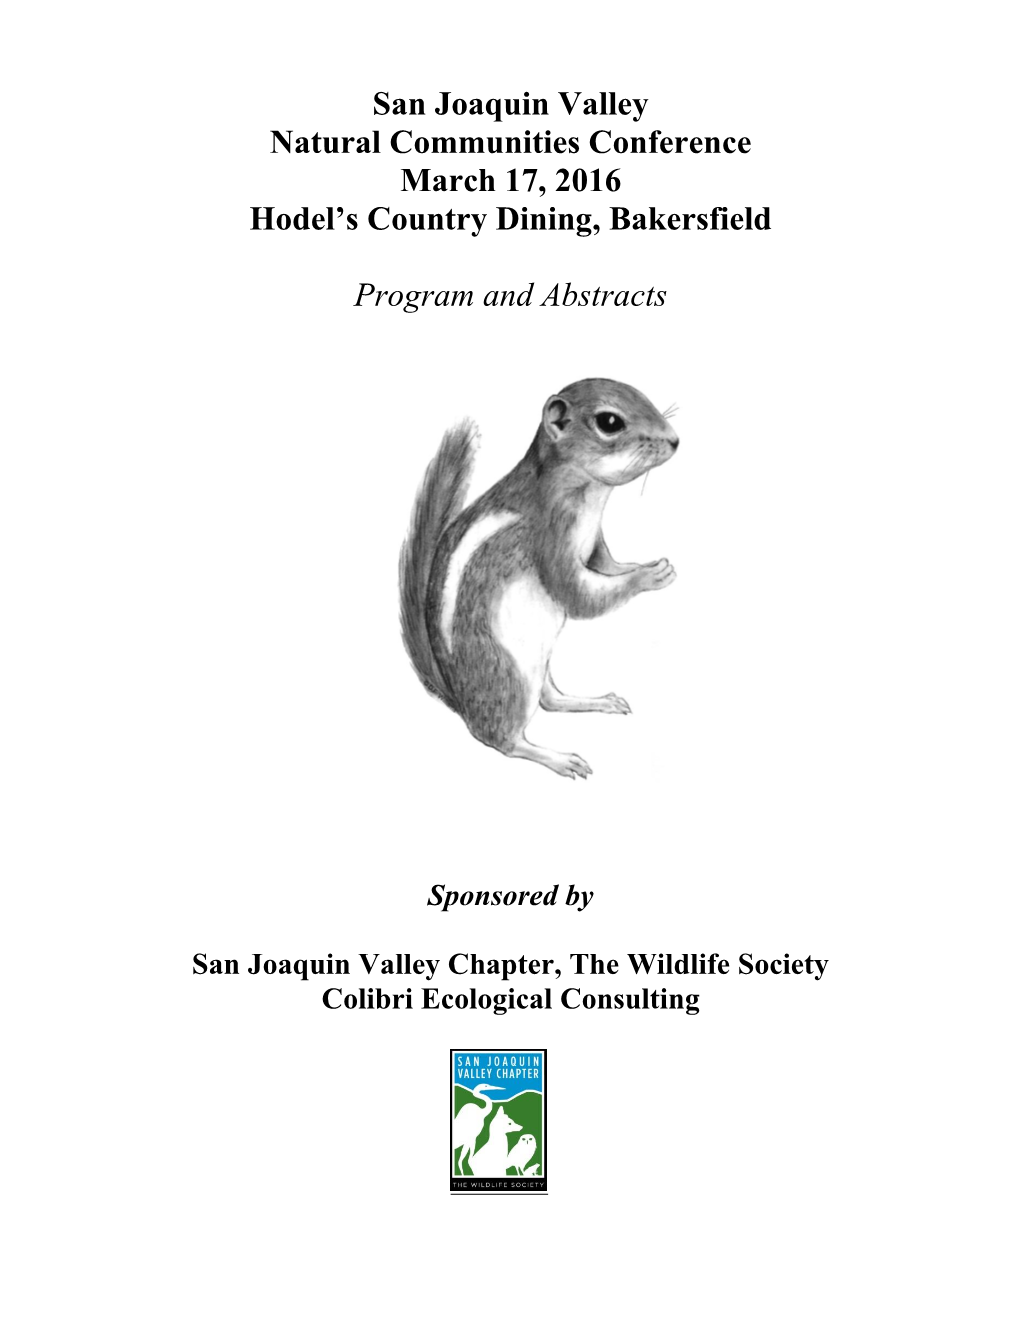 San Joaquin Valley Natural Communities Conference March 17, 2016 Hodel’S Country Dining, Bakersfield